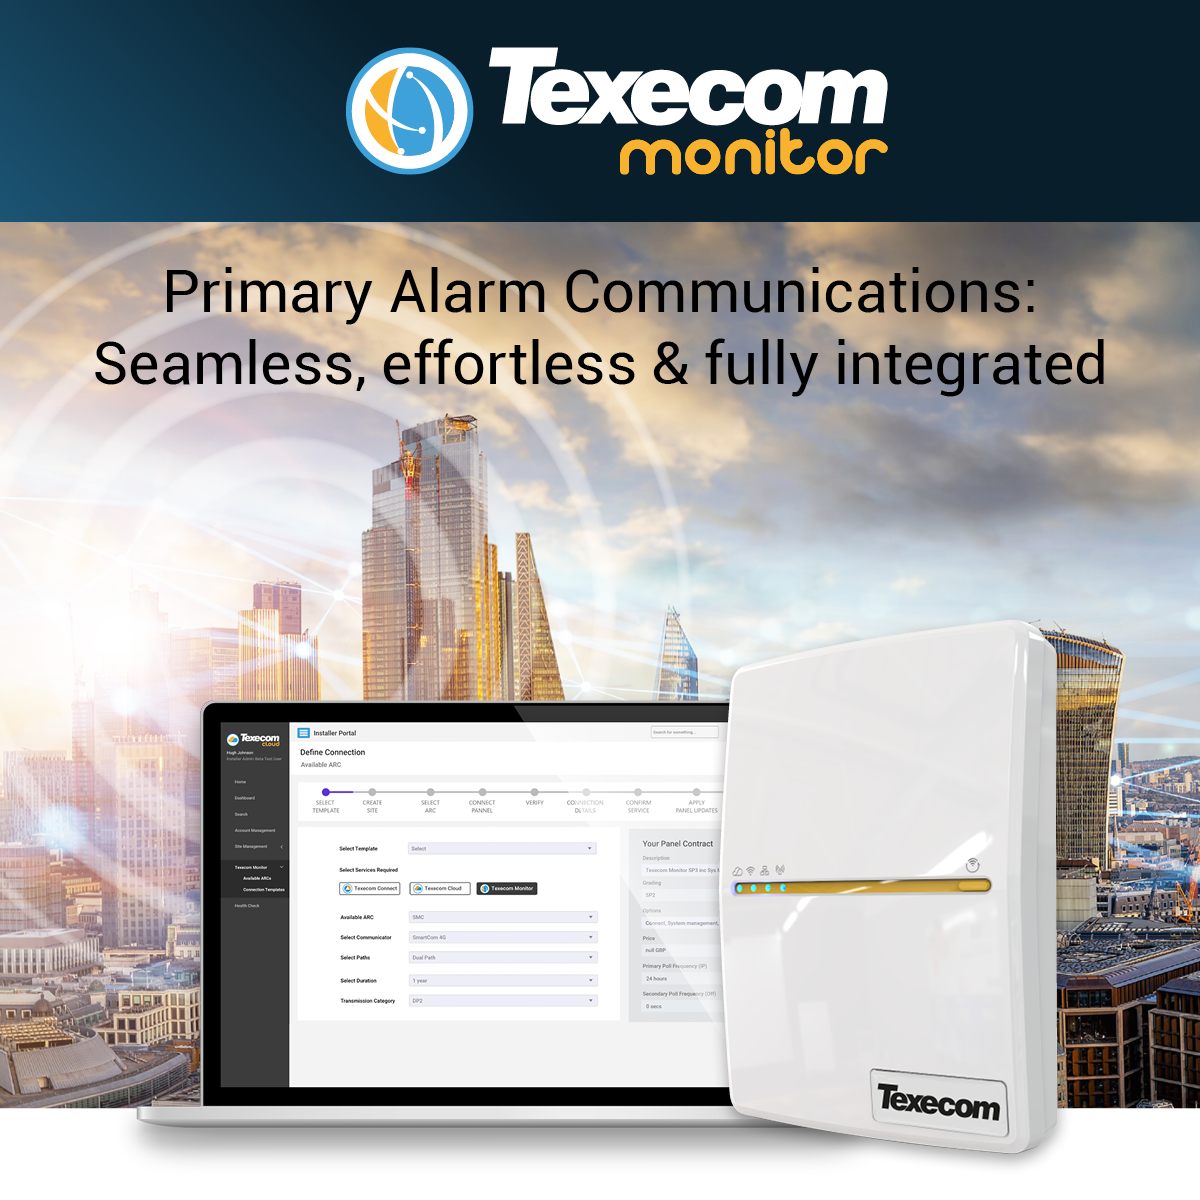 Texecom Monitor - Now available in the UK